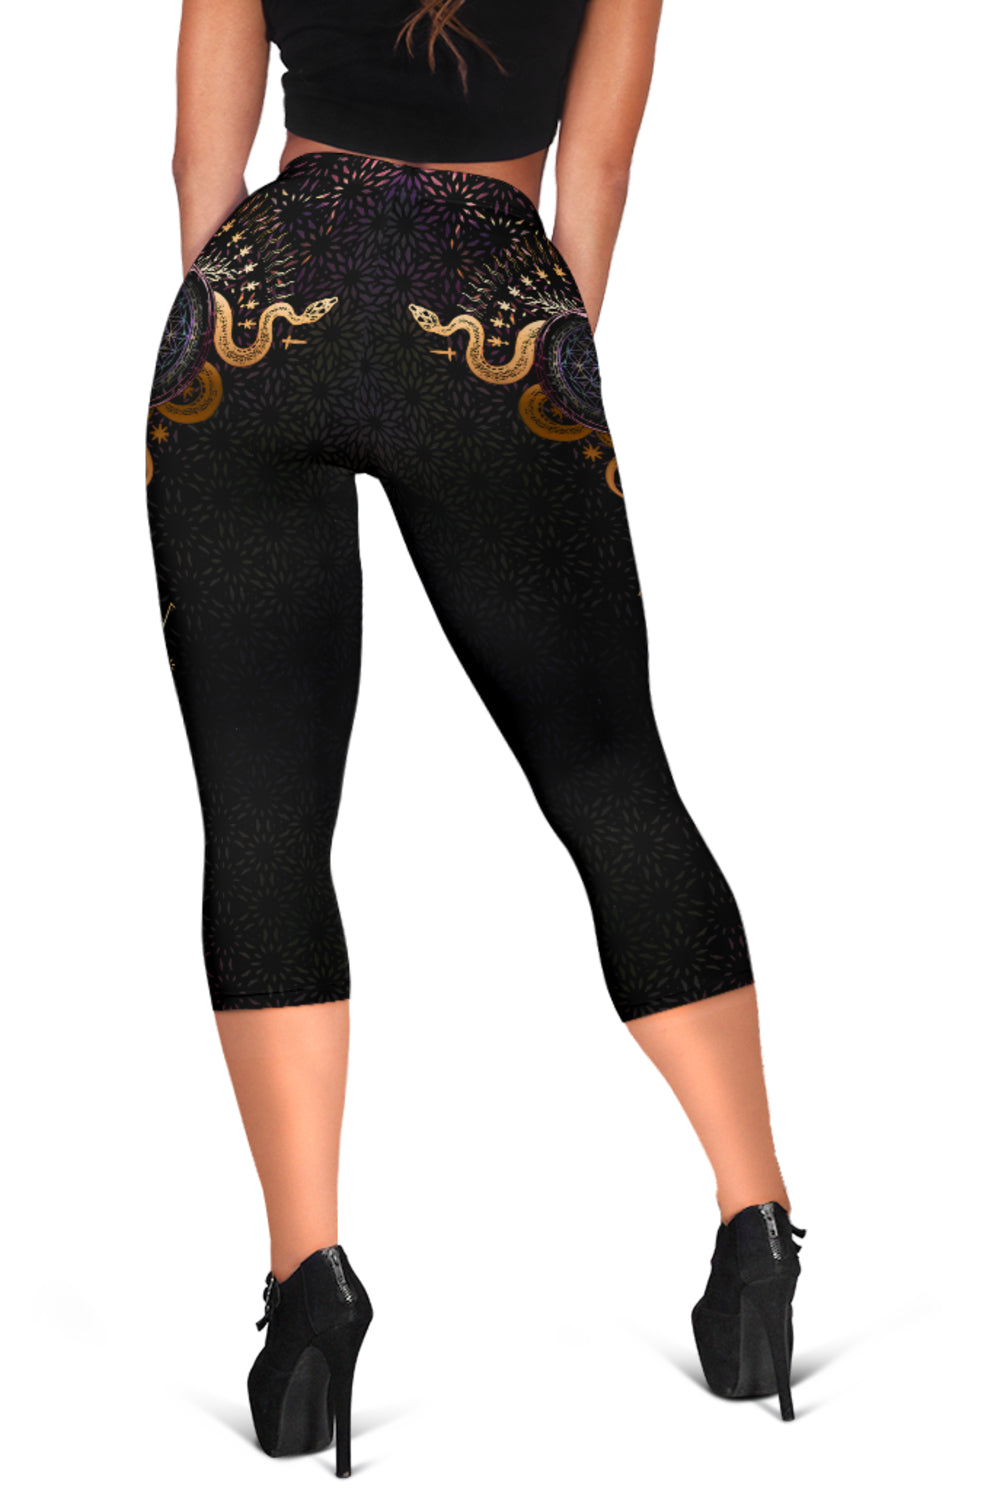 Seed of life || capris by Cosmic Shiva